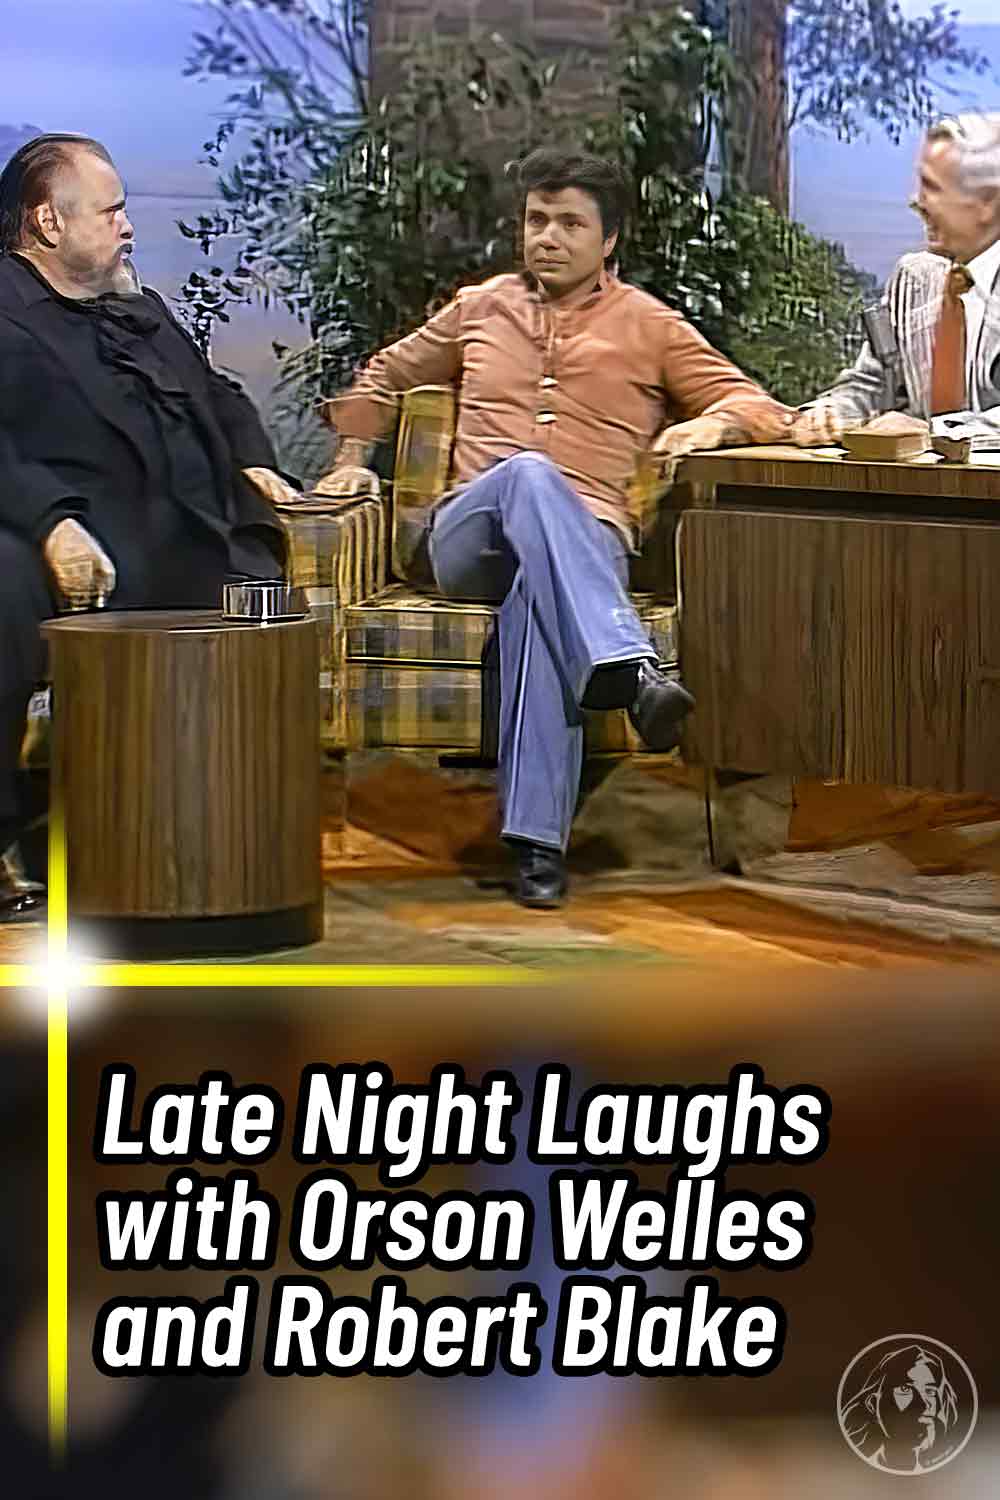 Late Night Laughs with Orson Welles and Robert Blake